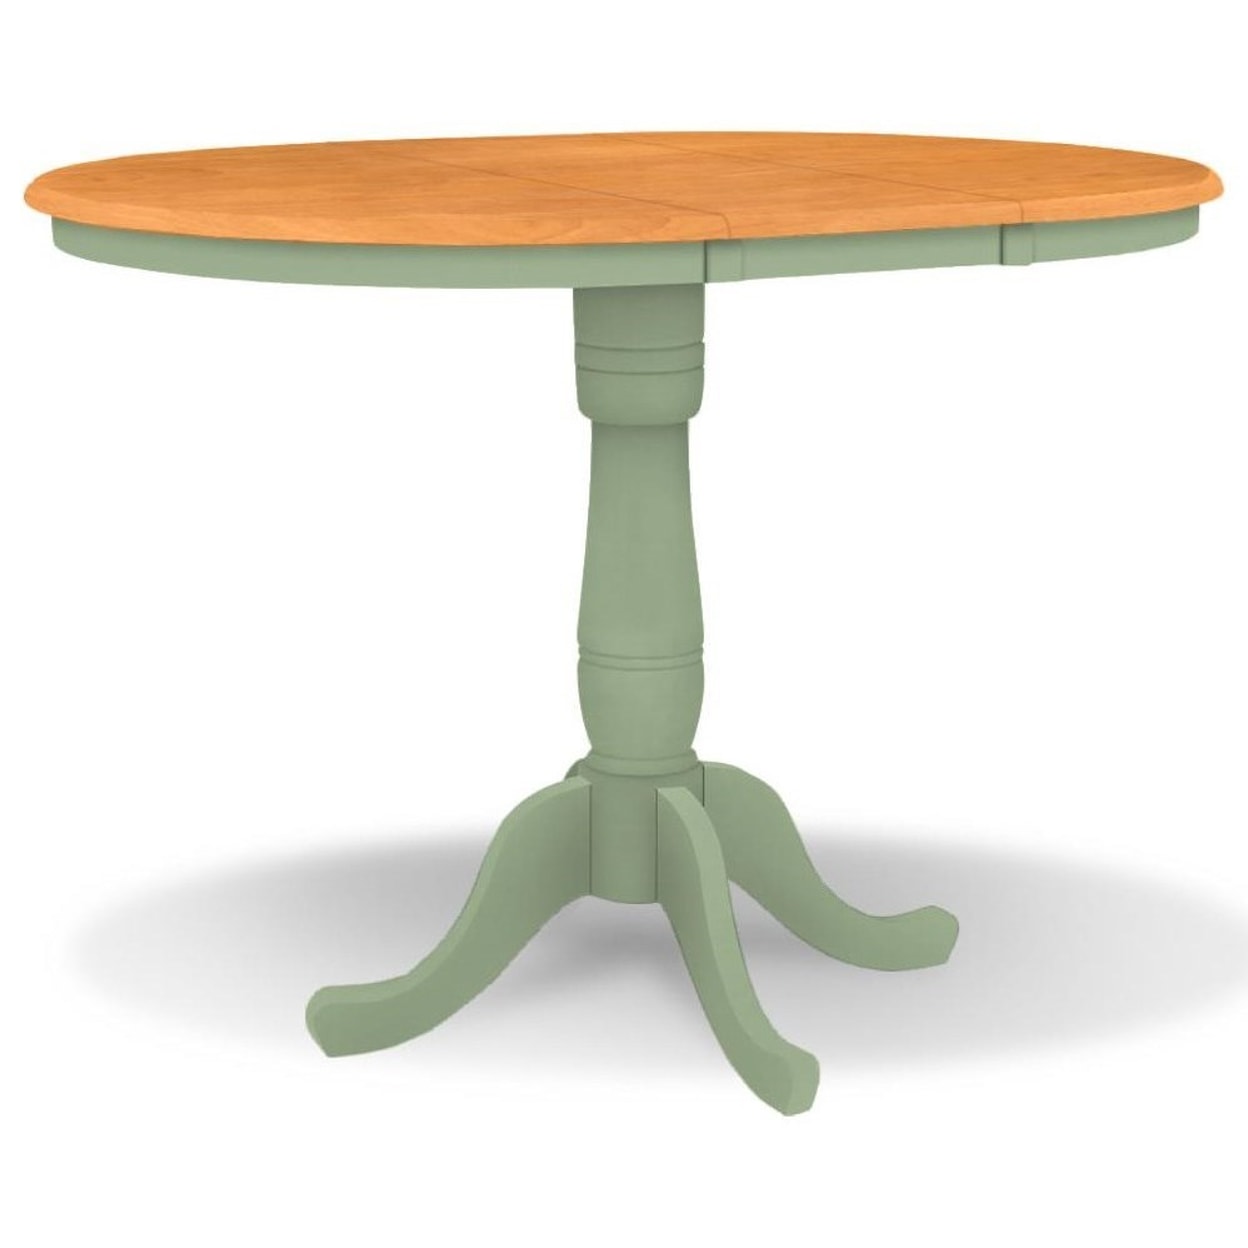 John Thomas SELECT Dining Room Adjustable Height Round Pedestal Table